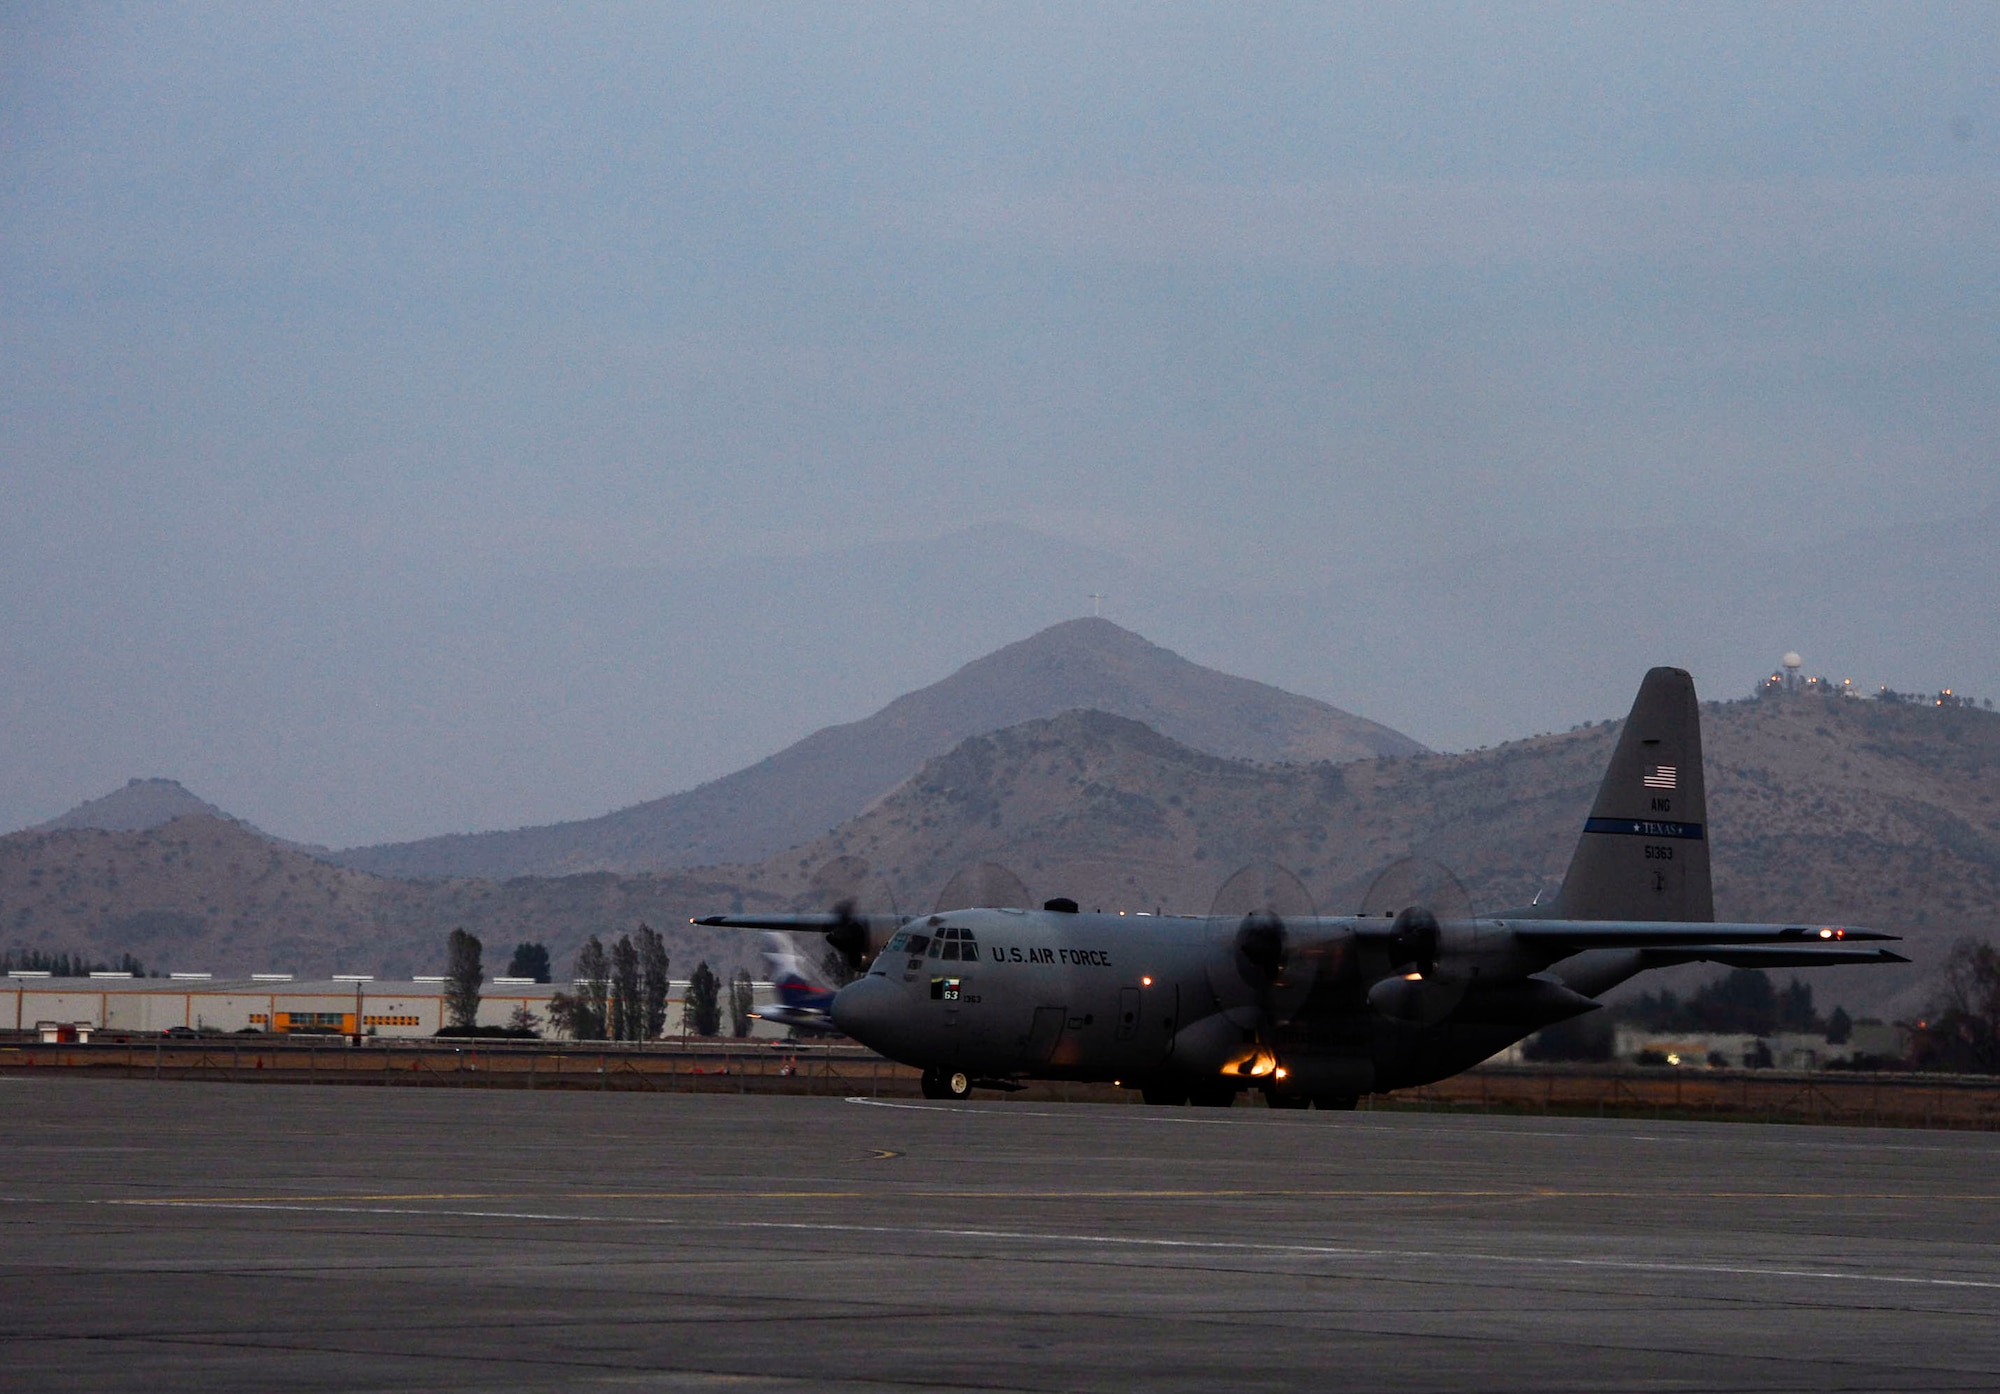 A C-130 from the Texas Air National Guard taxis into Santiago, Chile, to participate in the 2016 International Air and Space Fair (FIDAE), on March 27, 2016.  Airmen from around the U.S. are scheduled to participate in a variety of activities during the week-long air show that includes aerial demonstrations, interaction with the local community, and subject matter expert exchanges with the Chilean air force. (U.S. Air Force photo by Tech. Sgt. Heather Redman/Released)